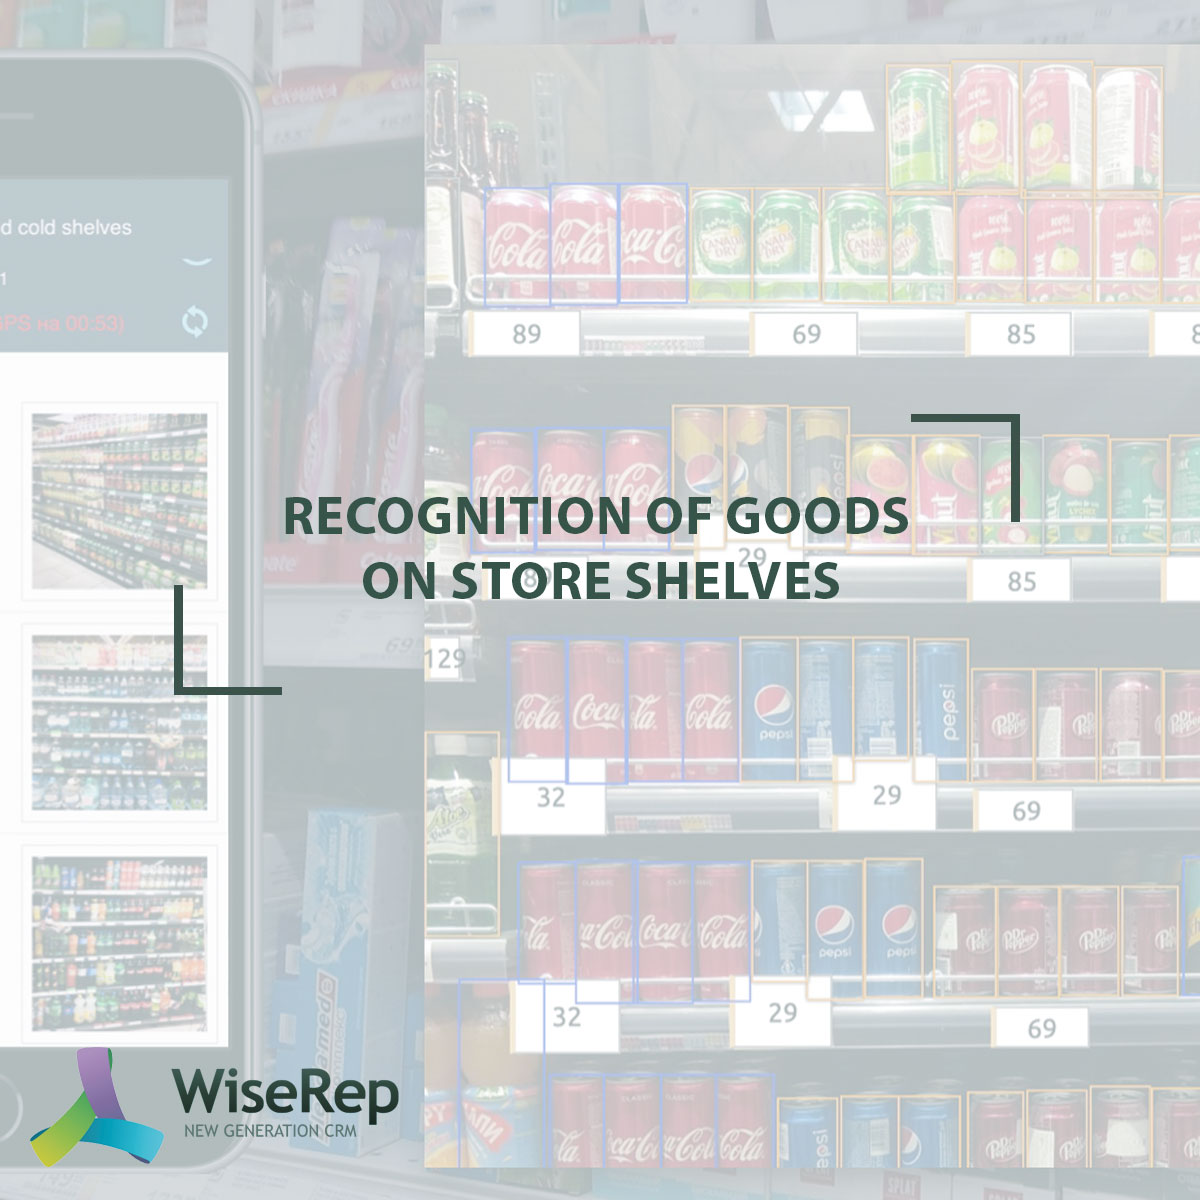 Recognition of goods on store shelves